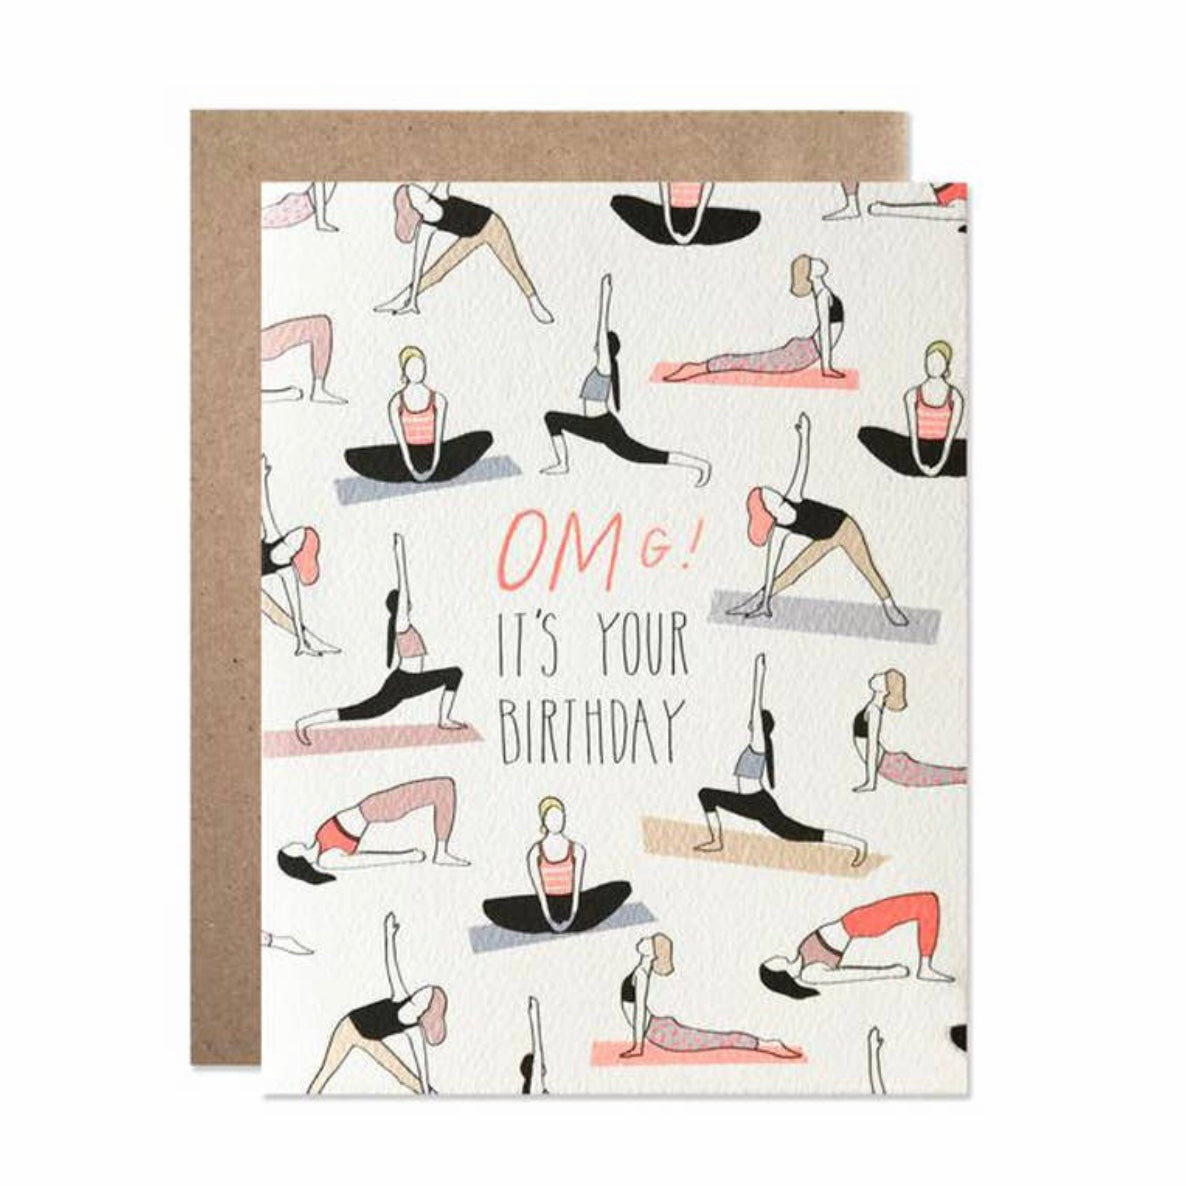 OMG It's your birthday greeting card